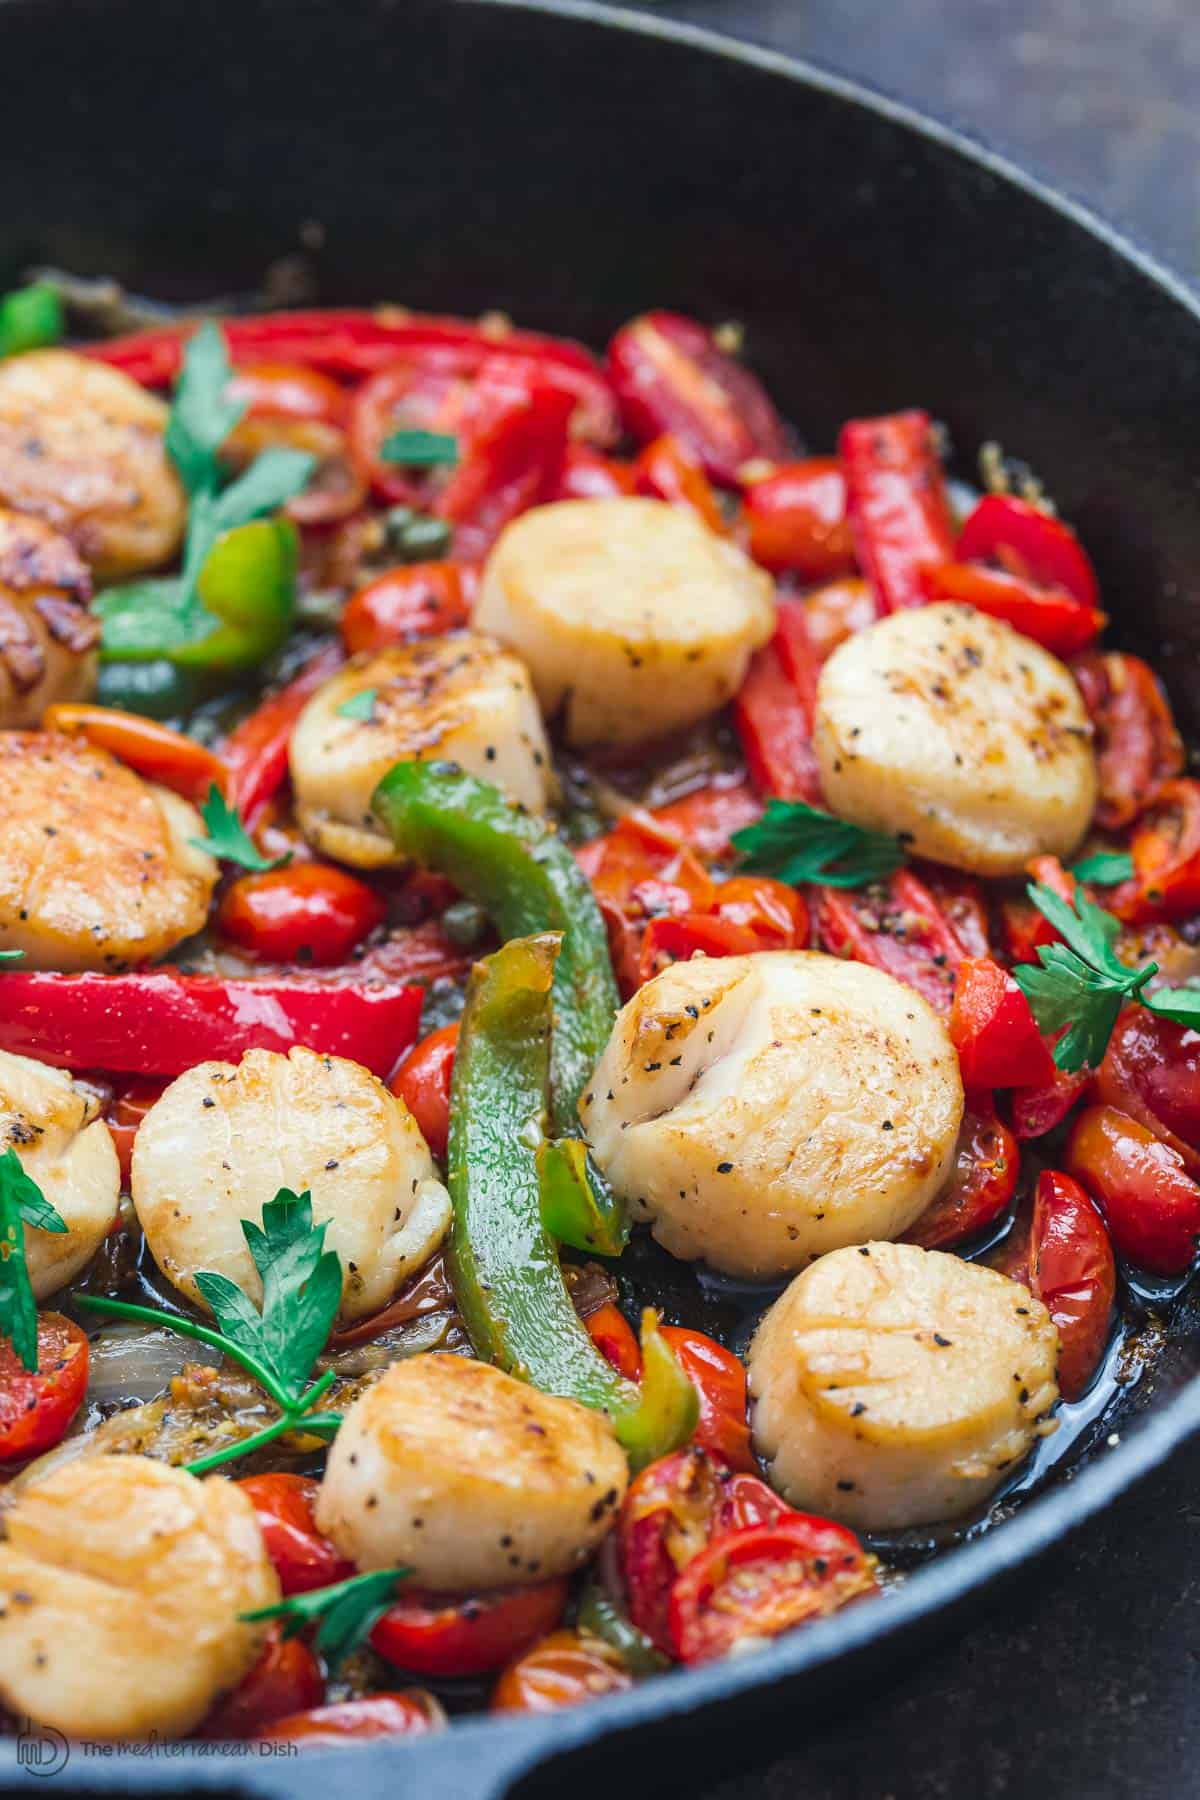 Scallops with vegetables in a cast iron skillet